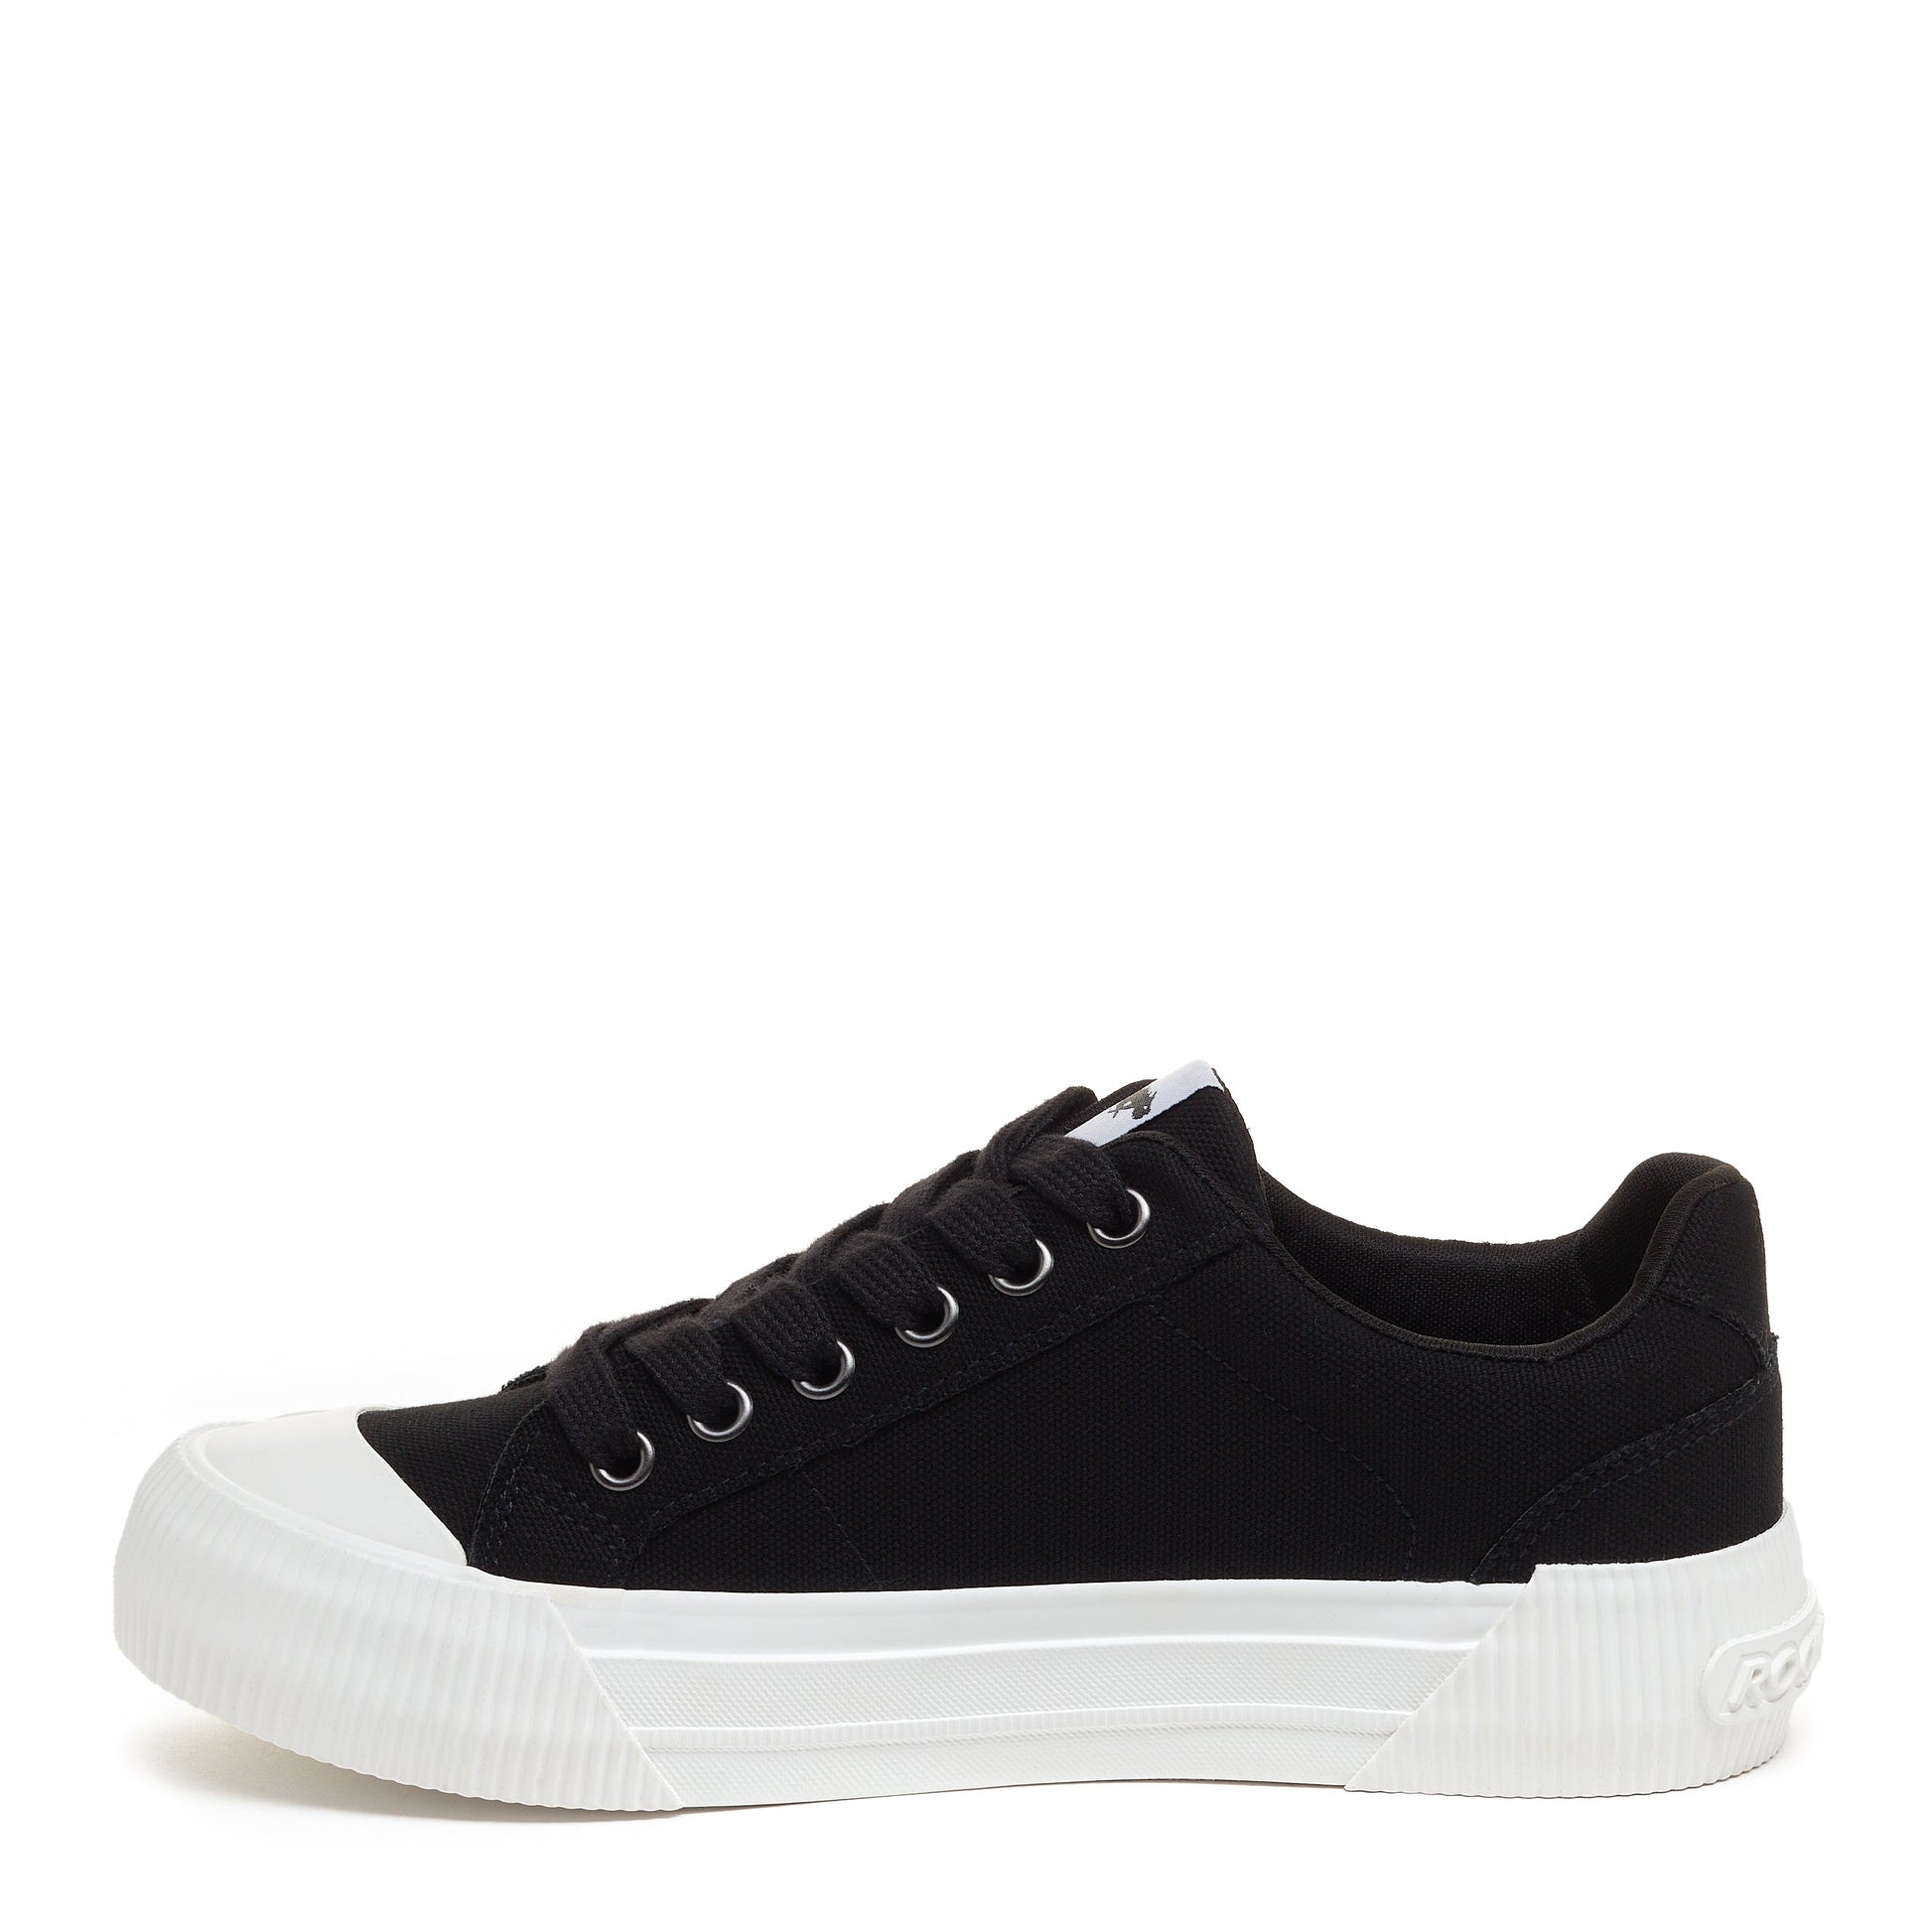 Cheery Black Sneakers: Classic Coolness by Rocket Dog